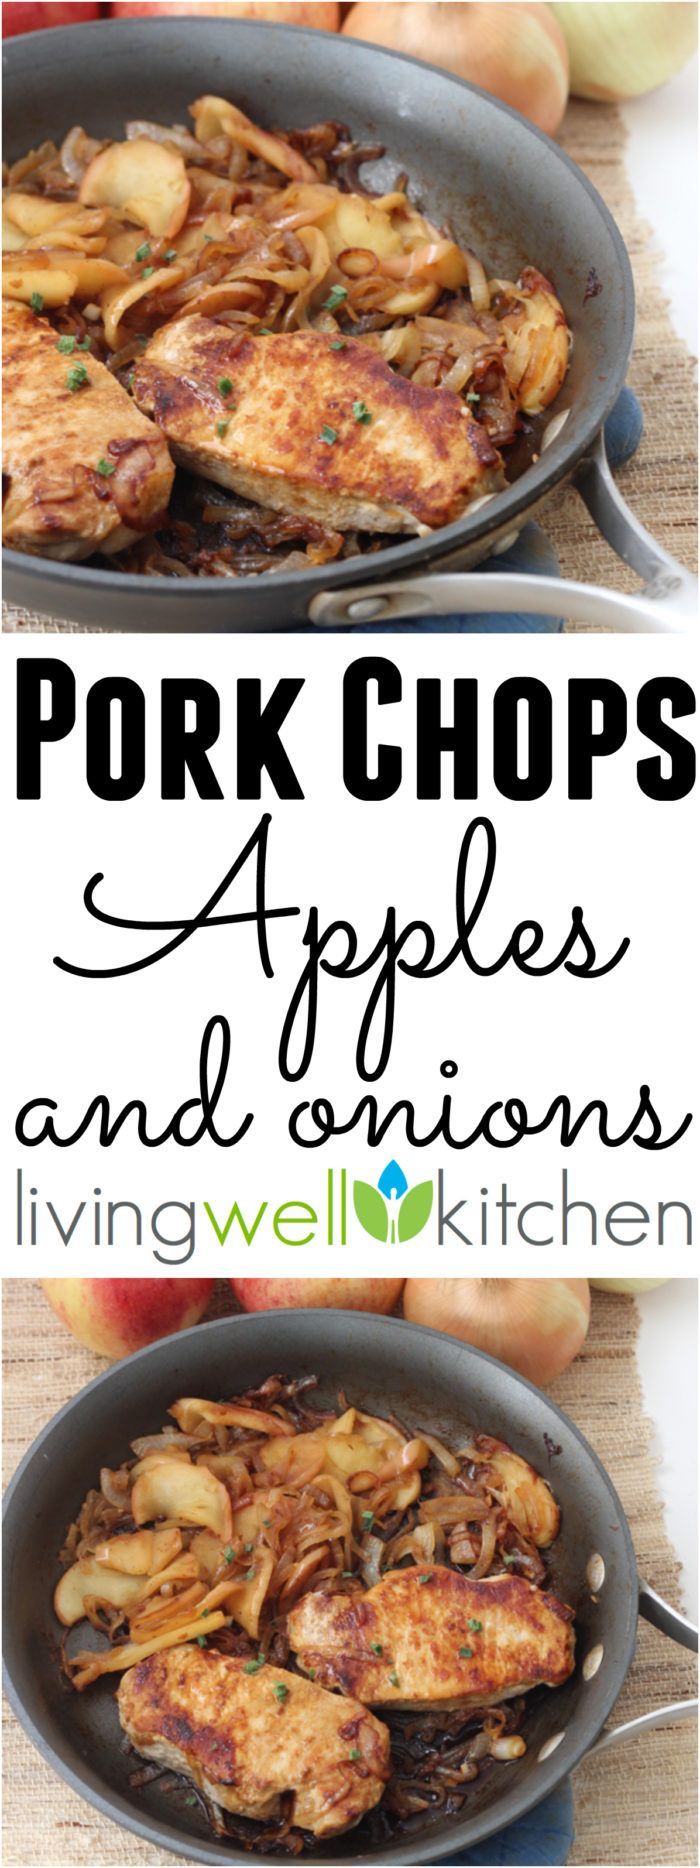 An easy one skillet meal that packs in the fall flavor with sweet caramelized onions and apples to balance out the savory pork.